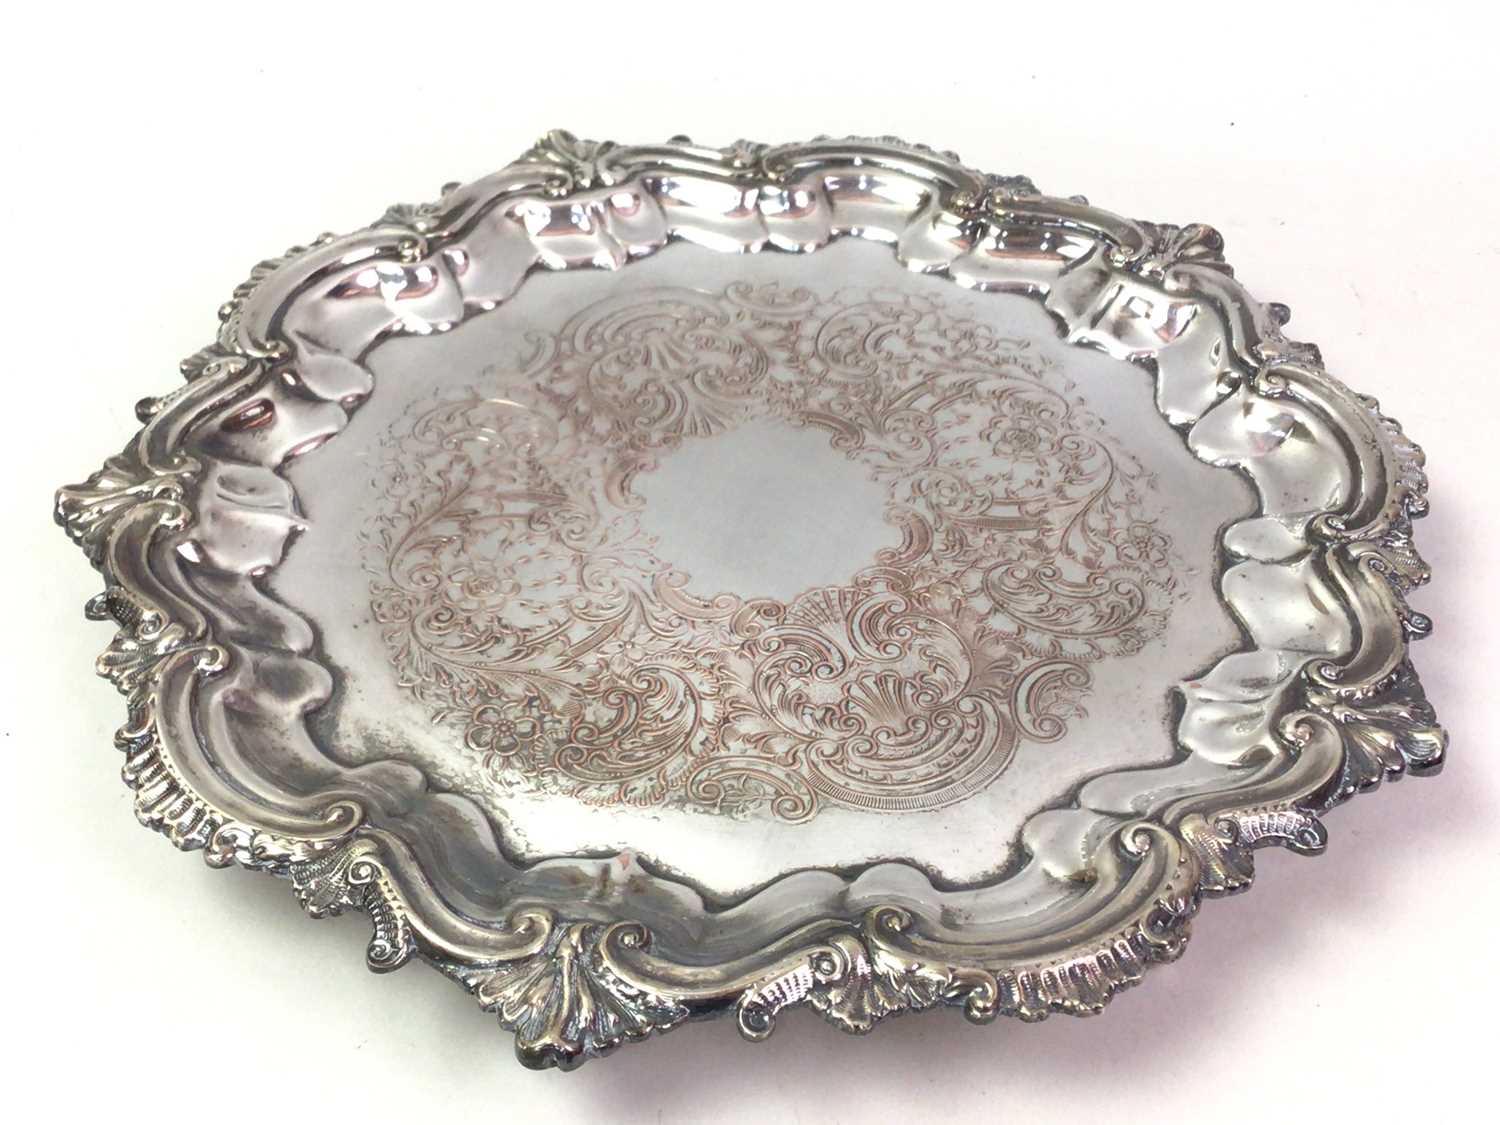 THREE SILVER PLATED GALLERY TRAYS, ALONG WITH A SILVER PLATED COMPORT AND OTHER ITEMS